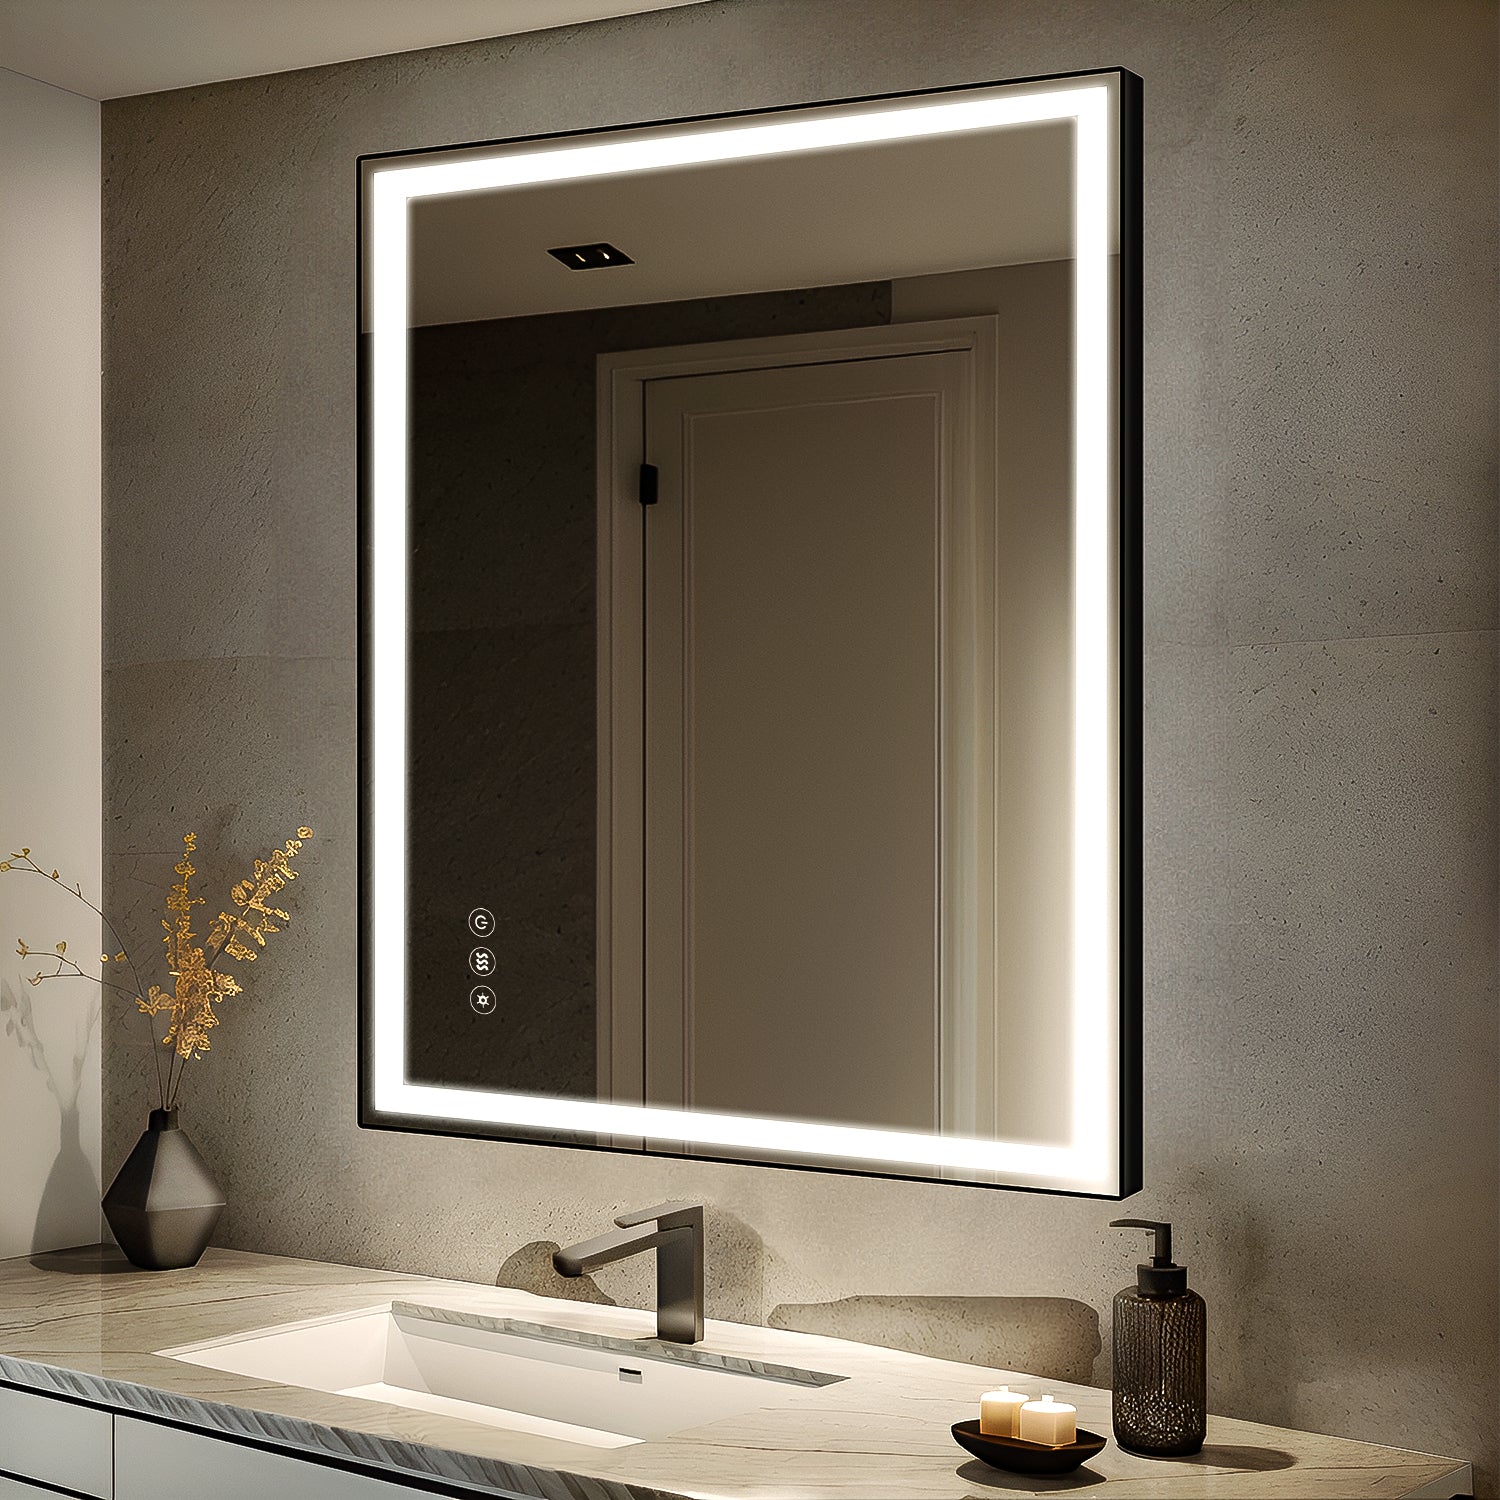 36 x 36 In. Touch Dimmable Memory Anti-Fog Bathroom Vanity Mirrors